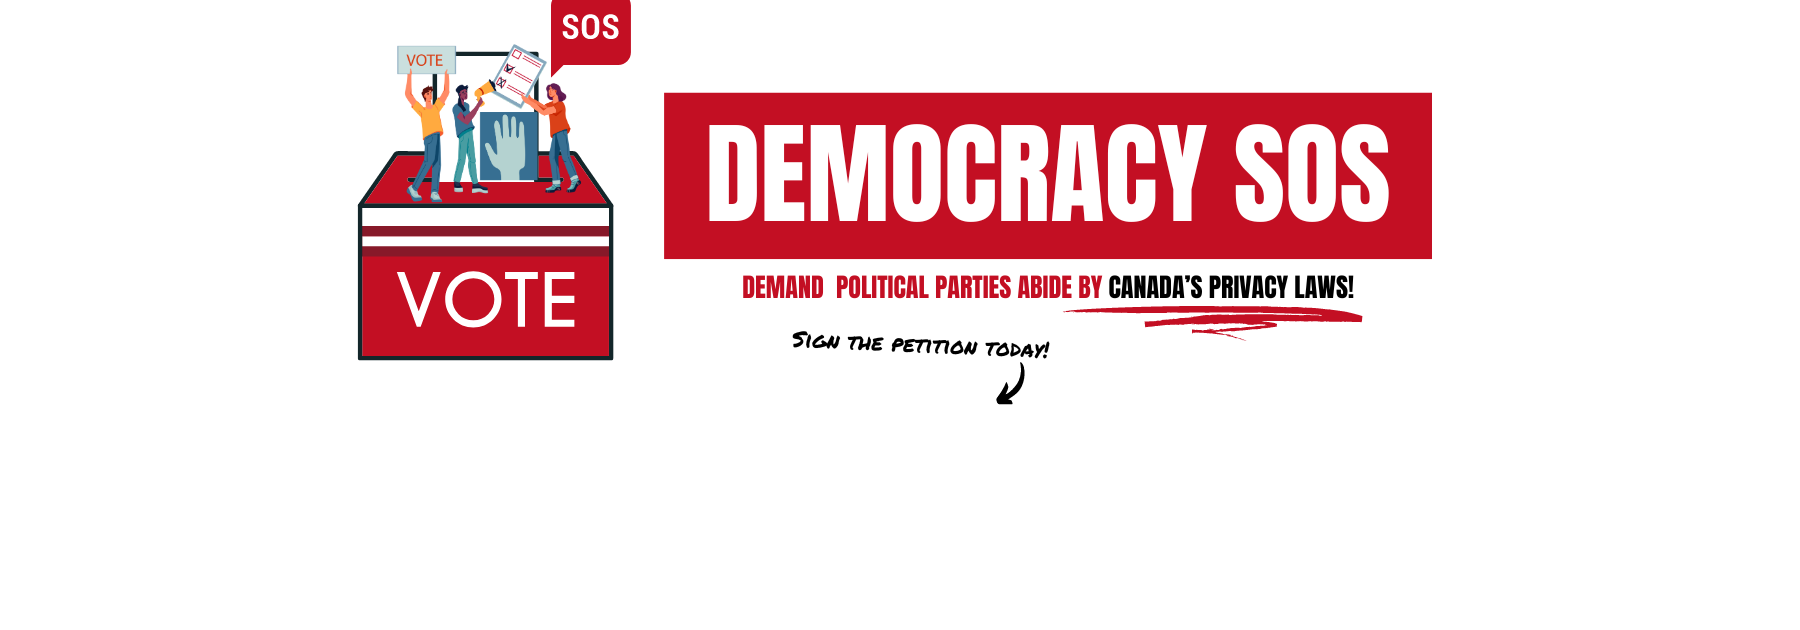 Demand political parties abide by Canada's privacy laws!